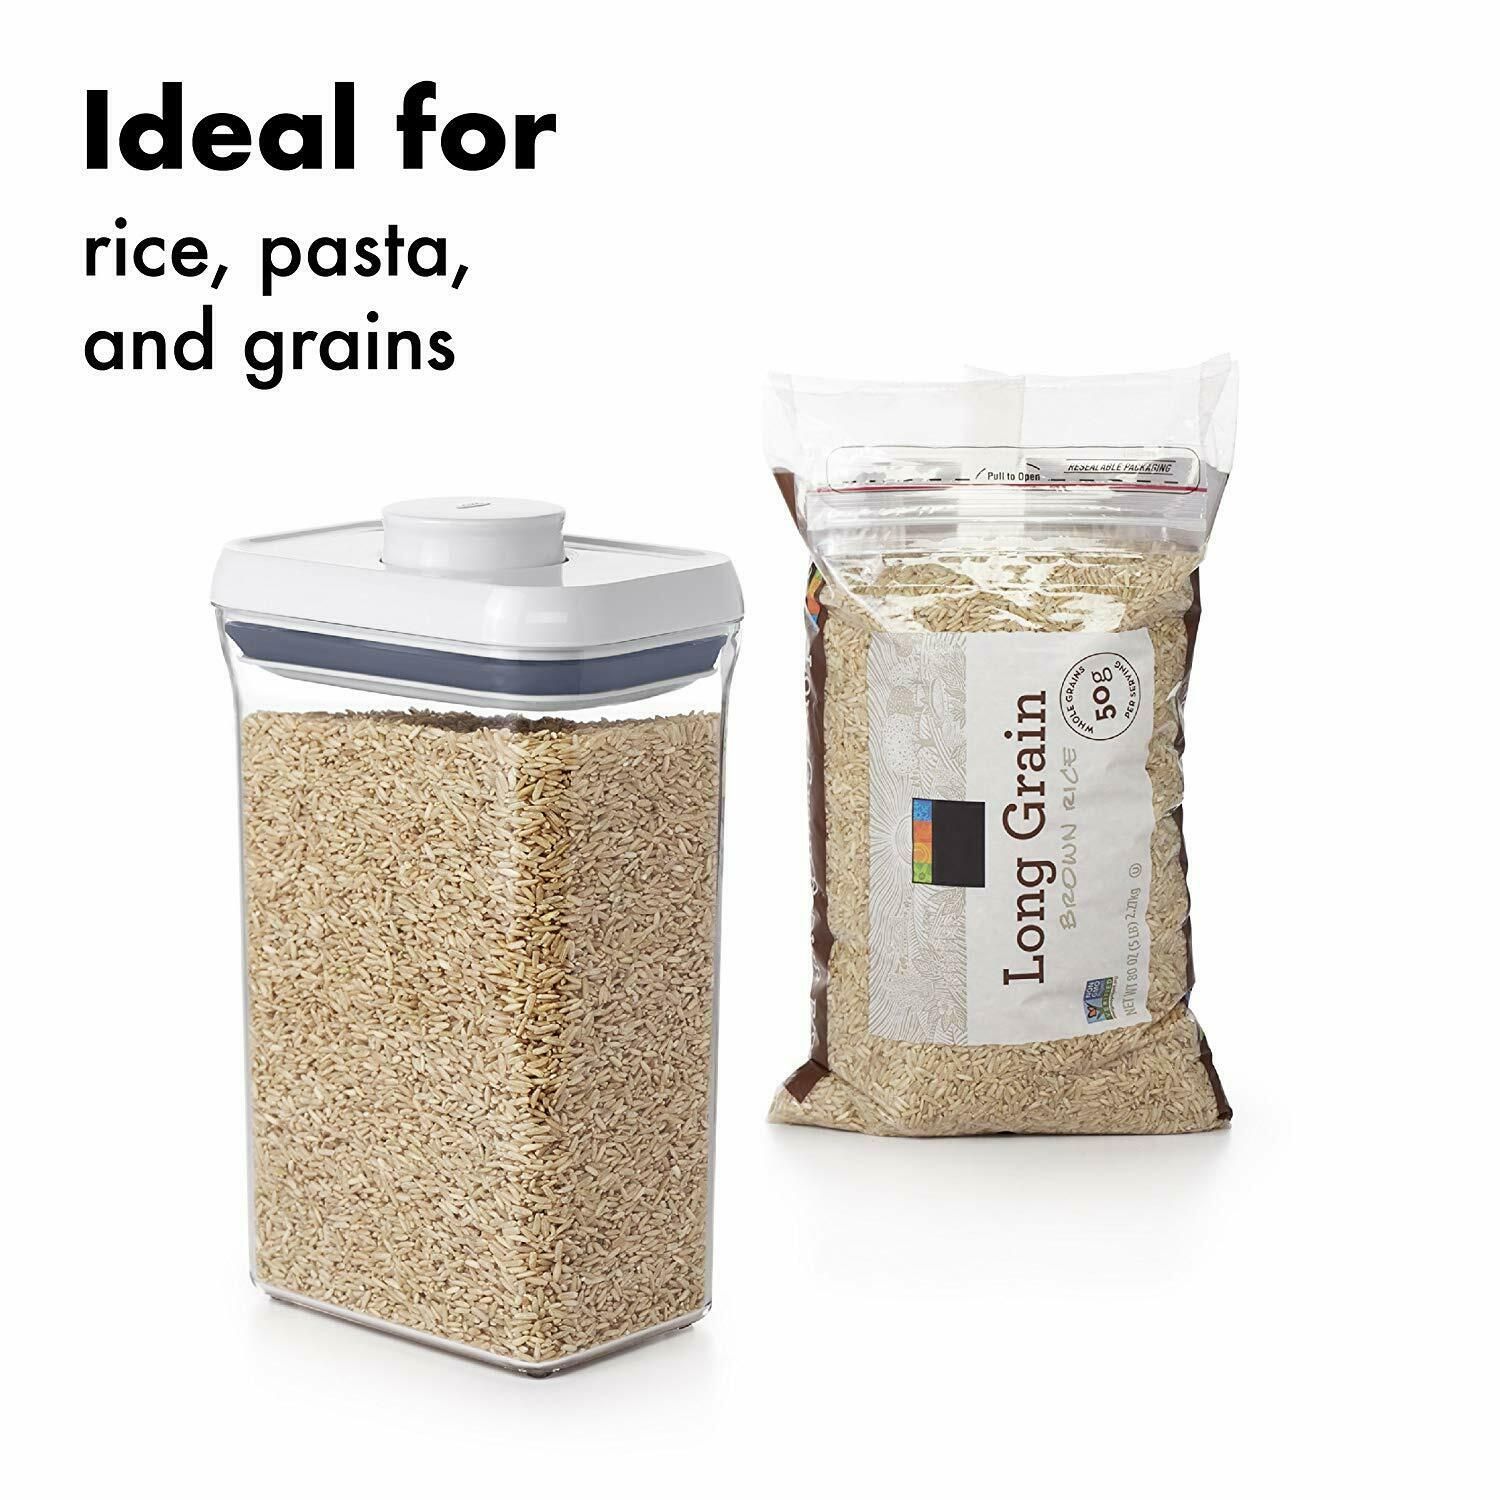 OXO Good Grips POP Container – Airtight Food Storage – 2.5 Qt for Rice and More